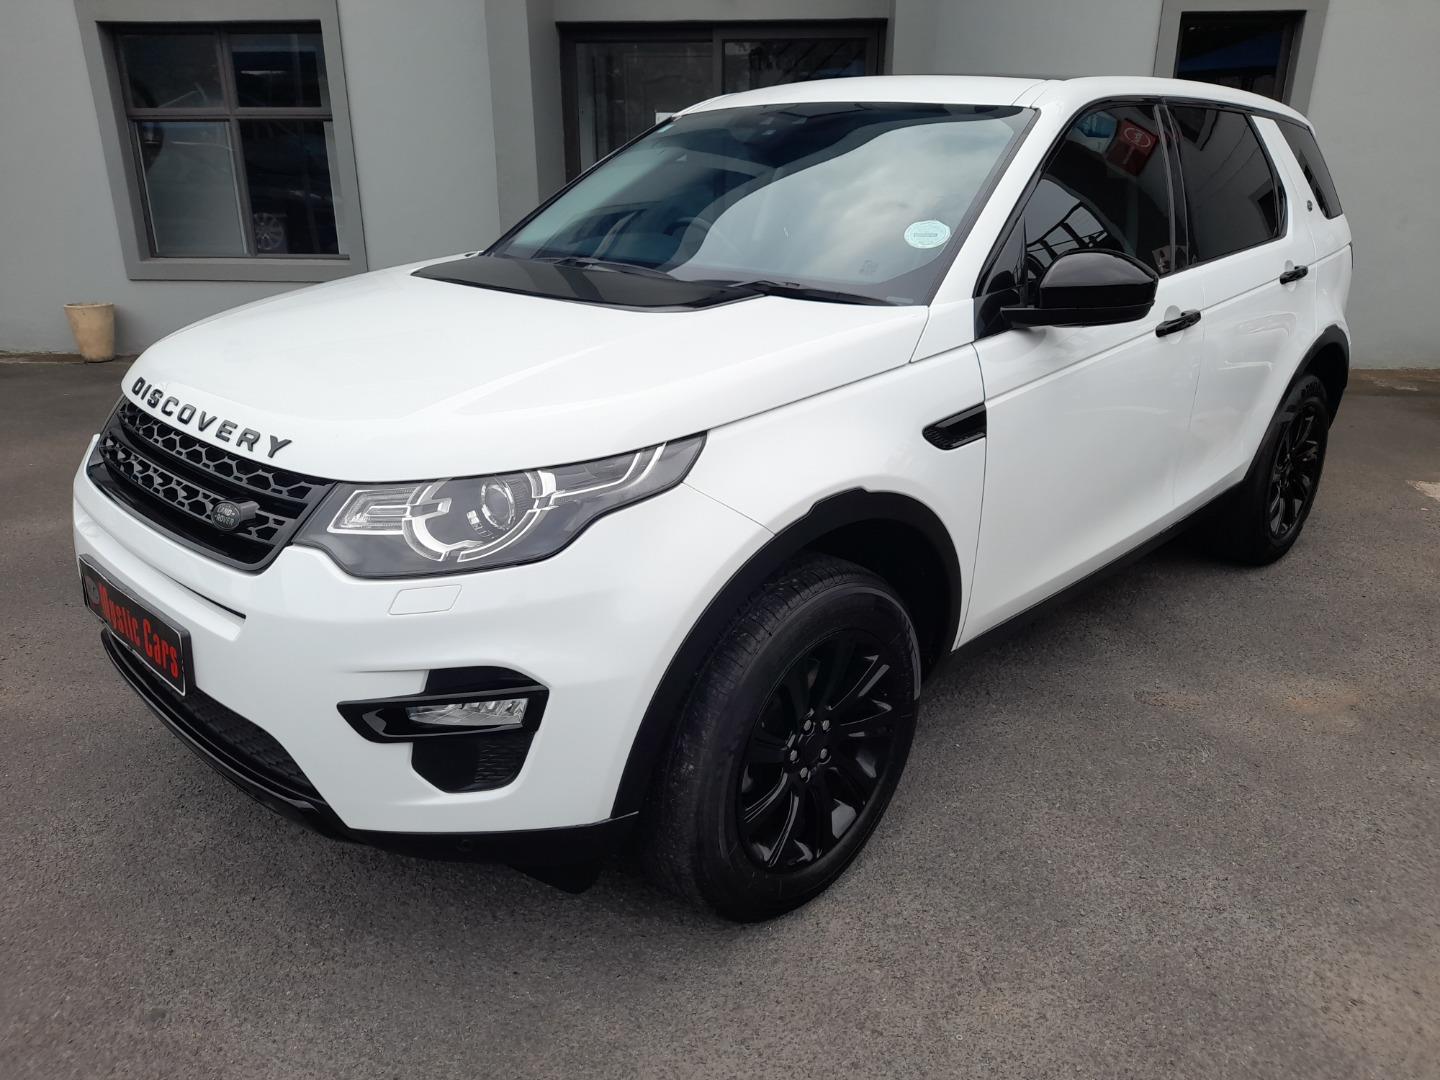 2015 LAND ROVER DISCOVERY SPORT Hse sd4